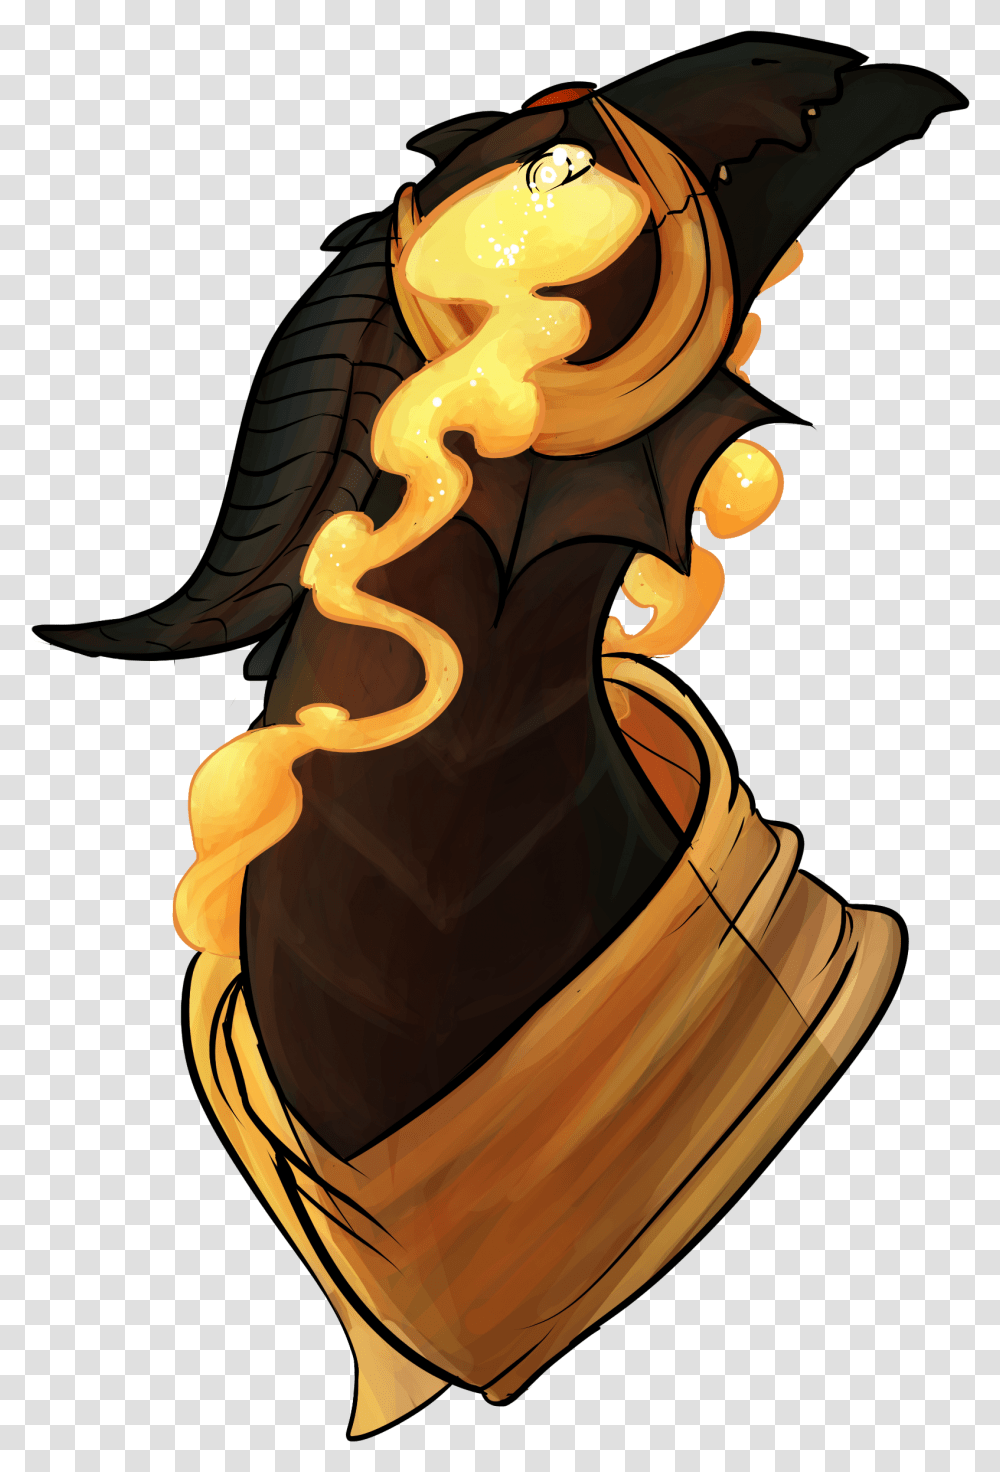 Bright Eyes Burning Like Fire - Weasyl Cartoon, Fire Hydrant, Flame, Sweets, Food Transparent Png